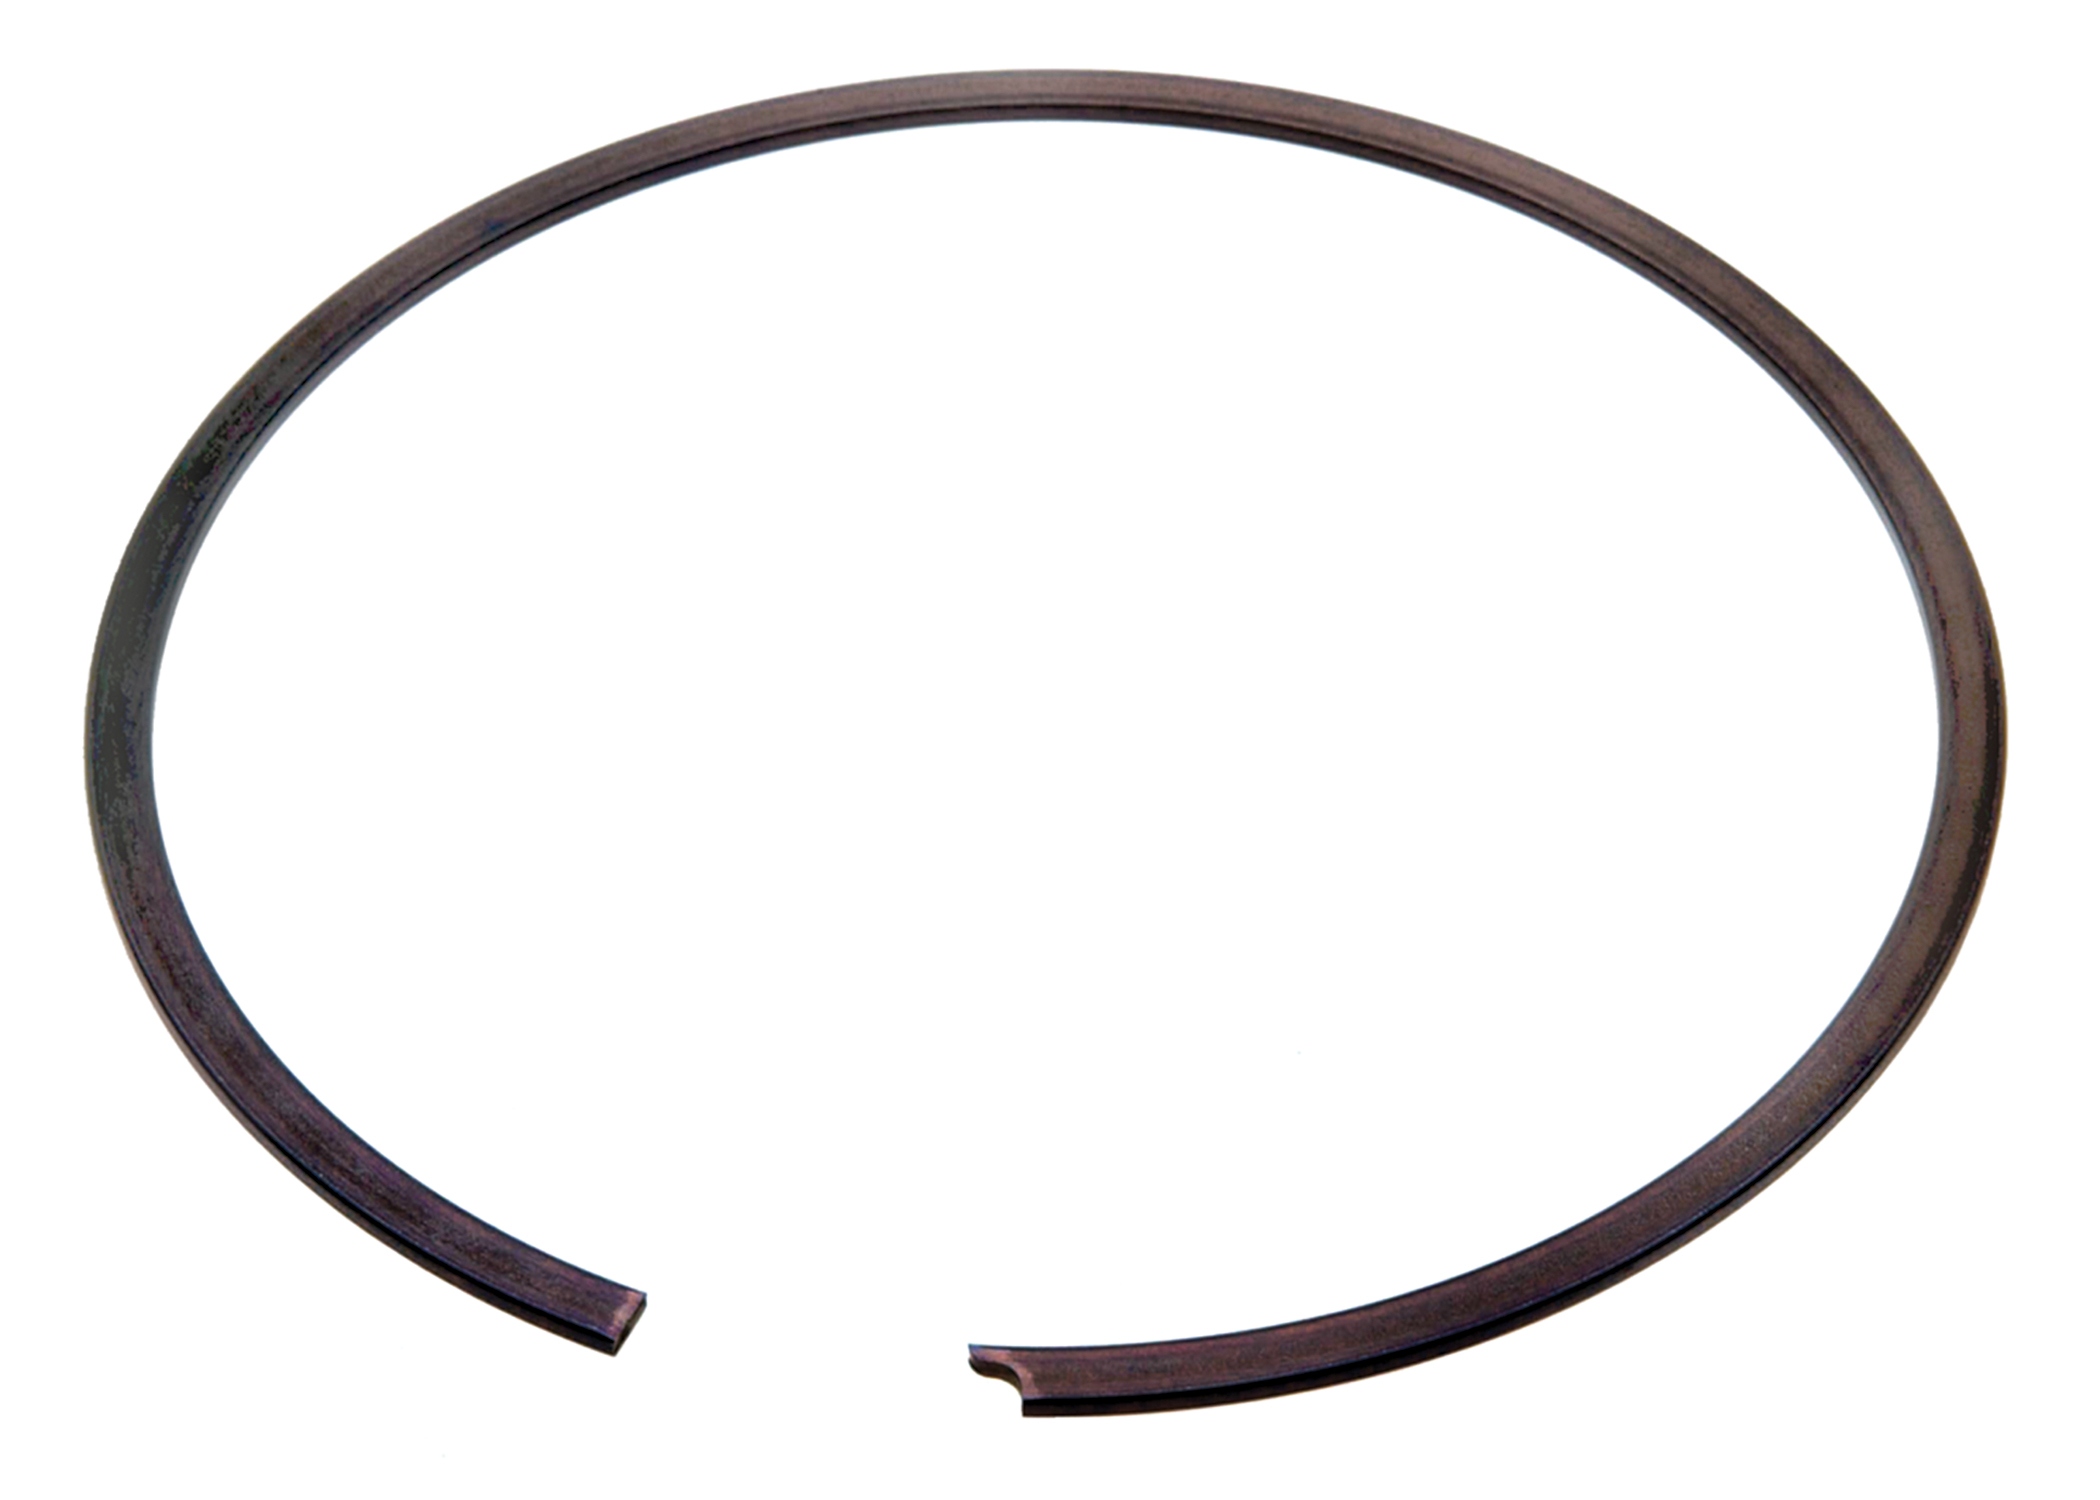 GM GENUINE PARTS CANADA - Automatic Transmission Clutch Backing Plate Retaining Ring - GMC 8663636